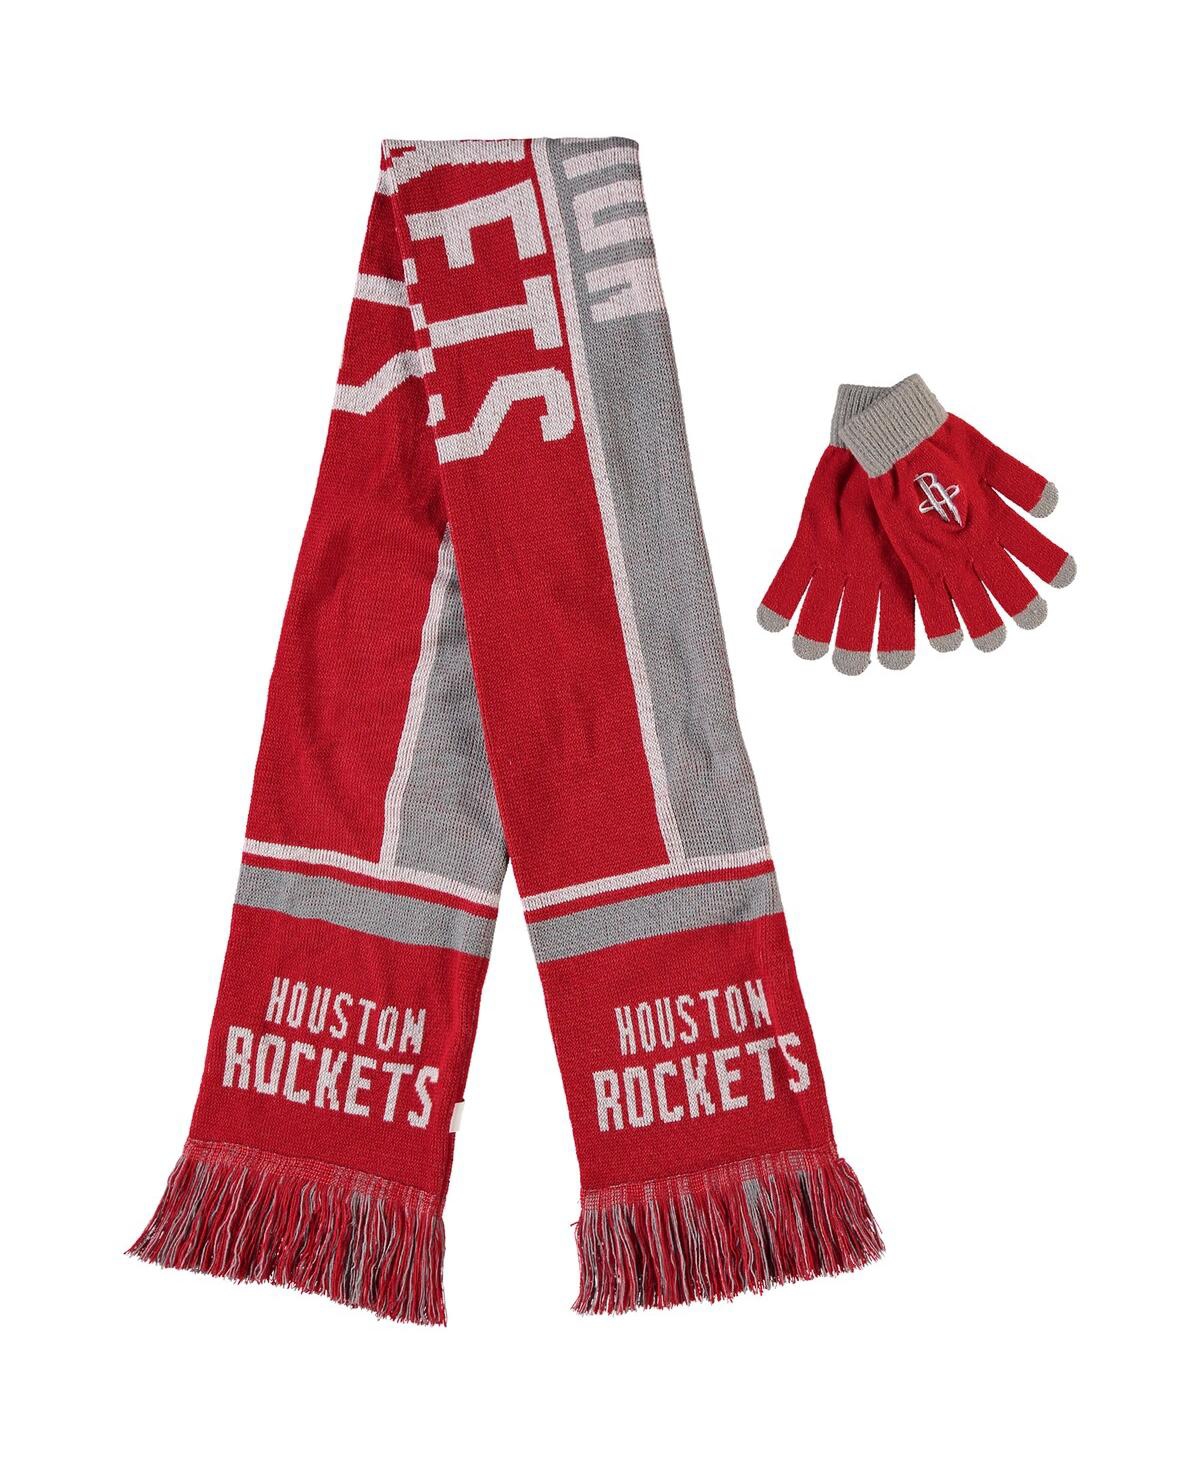 Men's and Women's Houston Rockets Hol Gloves and Scarf Set - Red, Gray